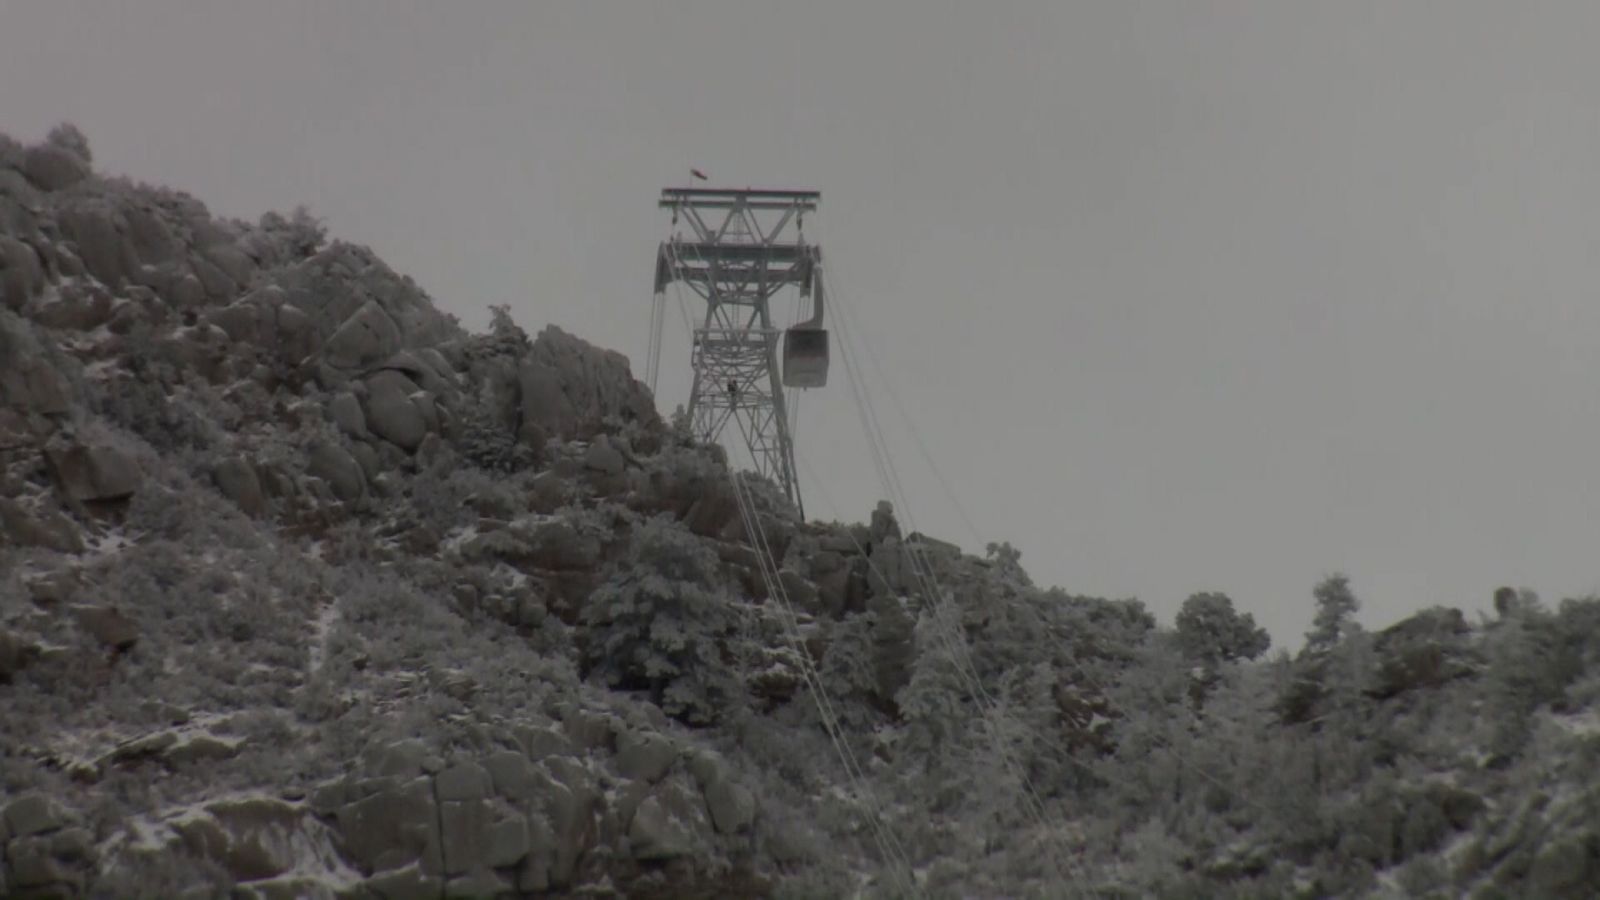 21 people rescued from stuck tram cars in New Mexico